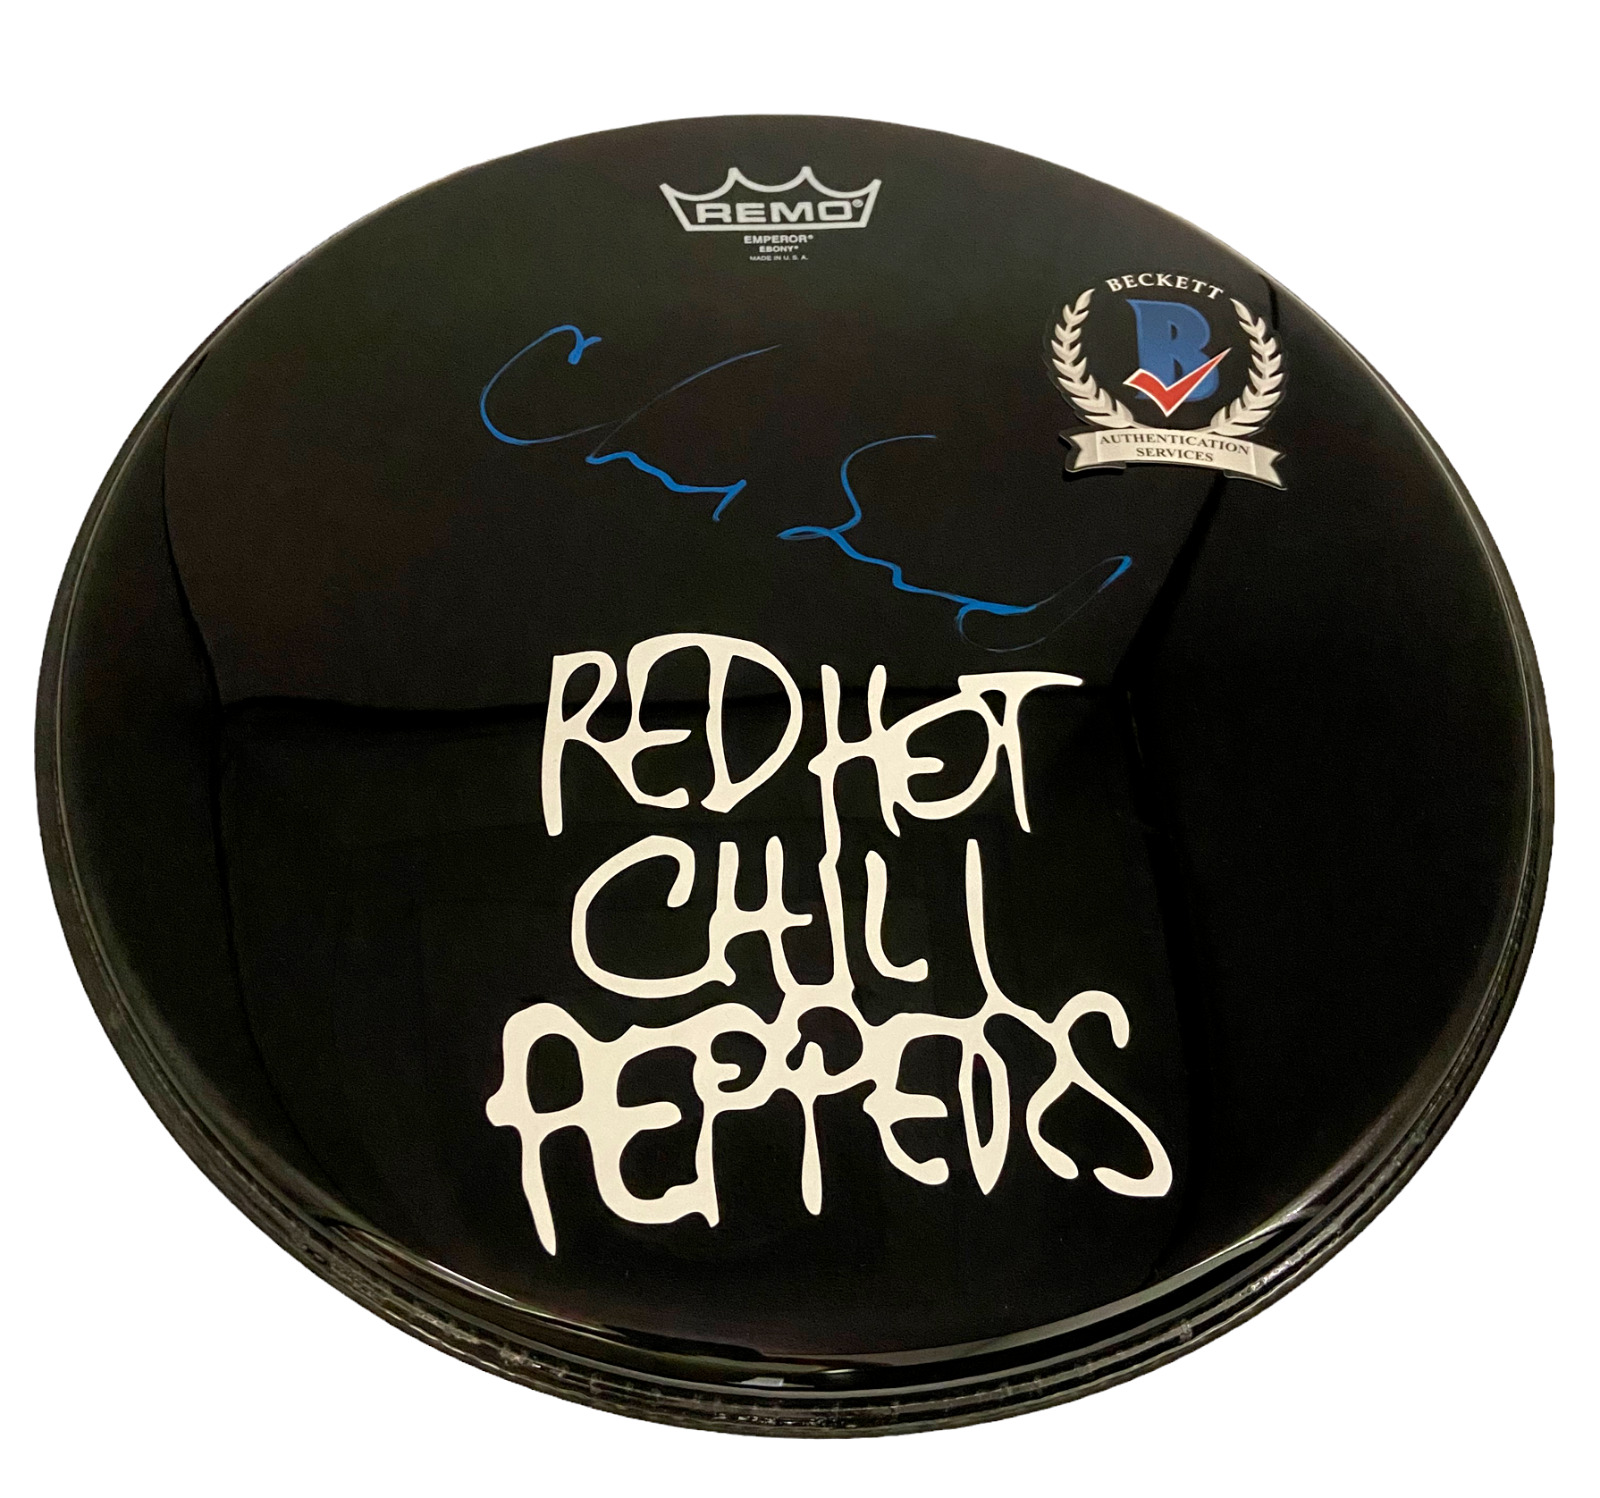 CHAD SMITH SIGNED AUTOGRAPH DRUM HEAD - RED HOT CHILI PEPPERS BECKETT BAS COA 